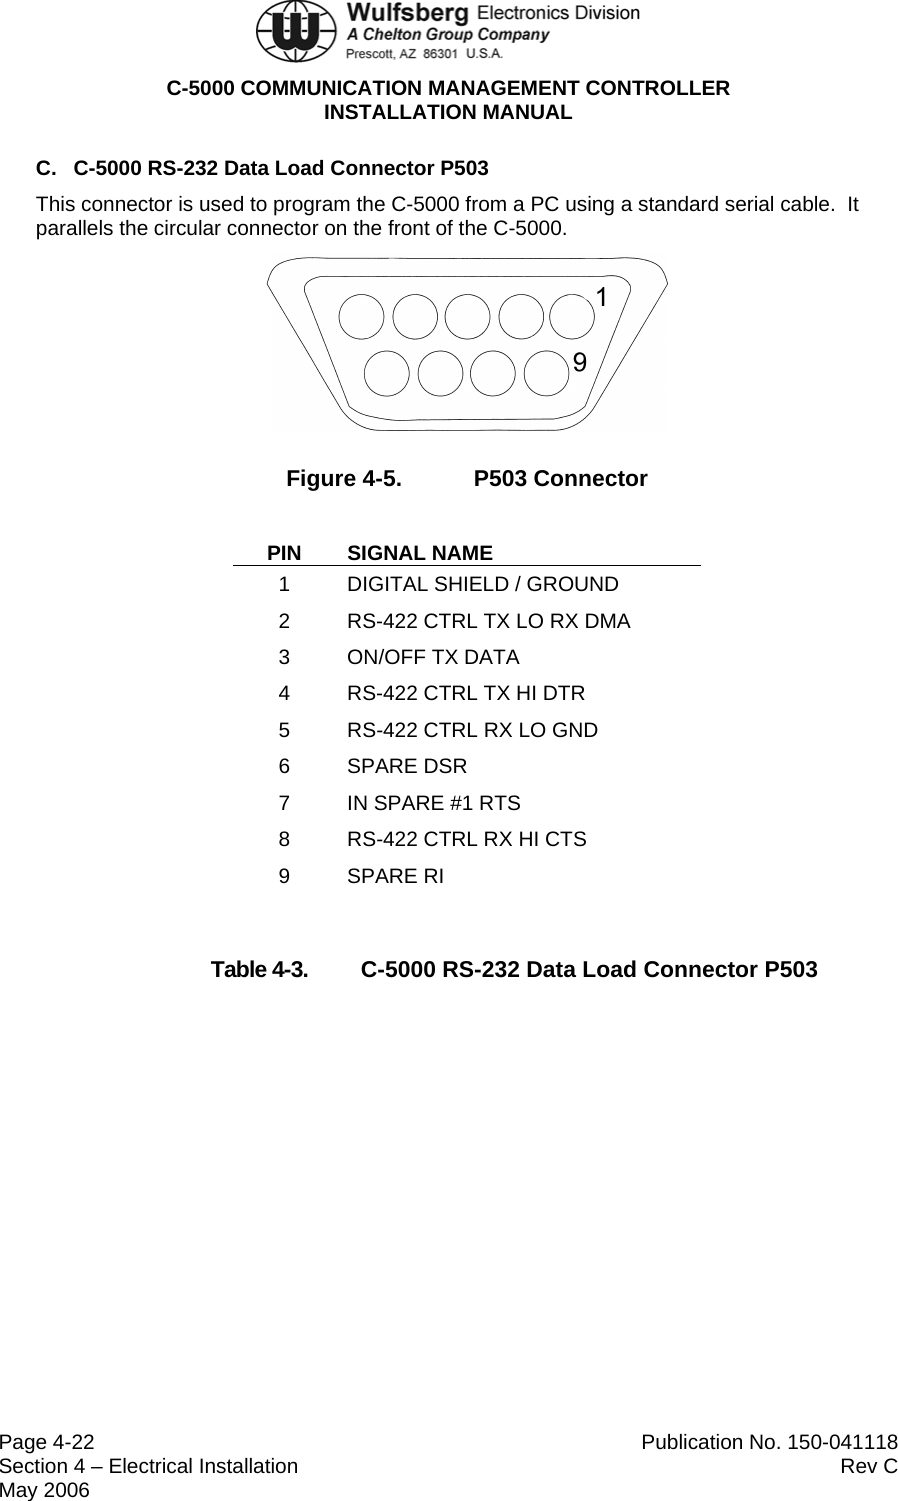  C-5000 COMMUNICATION MANAGEMENT CONTROLLER INSTALLATION MANUAL  Page 4-22  Publication No. 150-041118 Section 4 – Electrical Installation  Rev C May 2006 C.  C-5000 RS-232 Data Load Connector P503 This connector is used to program the C-5000 from a PC using a standard serial cable.  It parallels the circular connector on the front of the C-5000.  Figure 4-5.  P503 Connector PIN SIGNAL NAME 1  DIGITAL SHIELD / GROUND 2  RS-422 CTRL TX LO RX DMA 3 ON/OFF TX DATA 4  RS-422 CTRL TX HI DTR 5  RS-422 CTRL RX LO GND 6 SPARE DSR 7  IN SPARE #1 RTS 8  RS-422 CTRL RX HI CTS 9 SPARE RI   Table 4-3.  C-5000 RS-232 Data Load Connector P503 